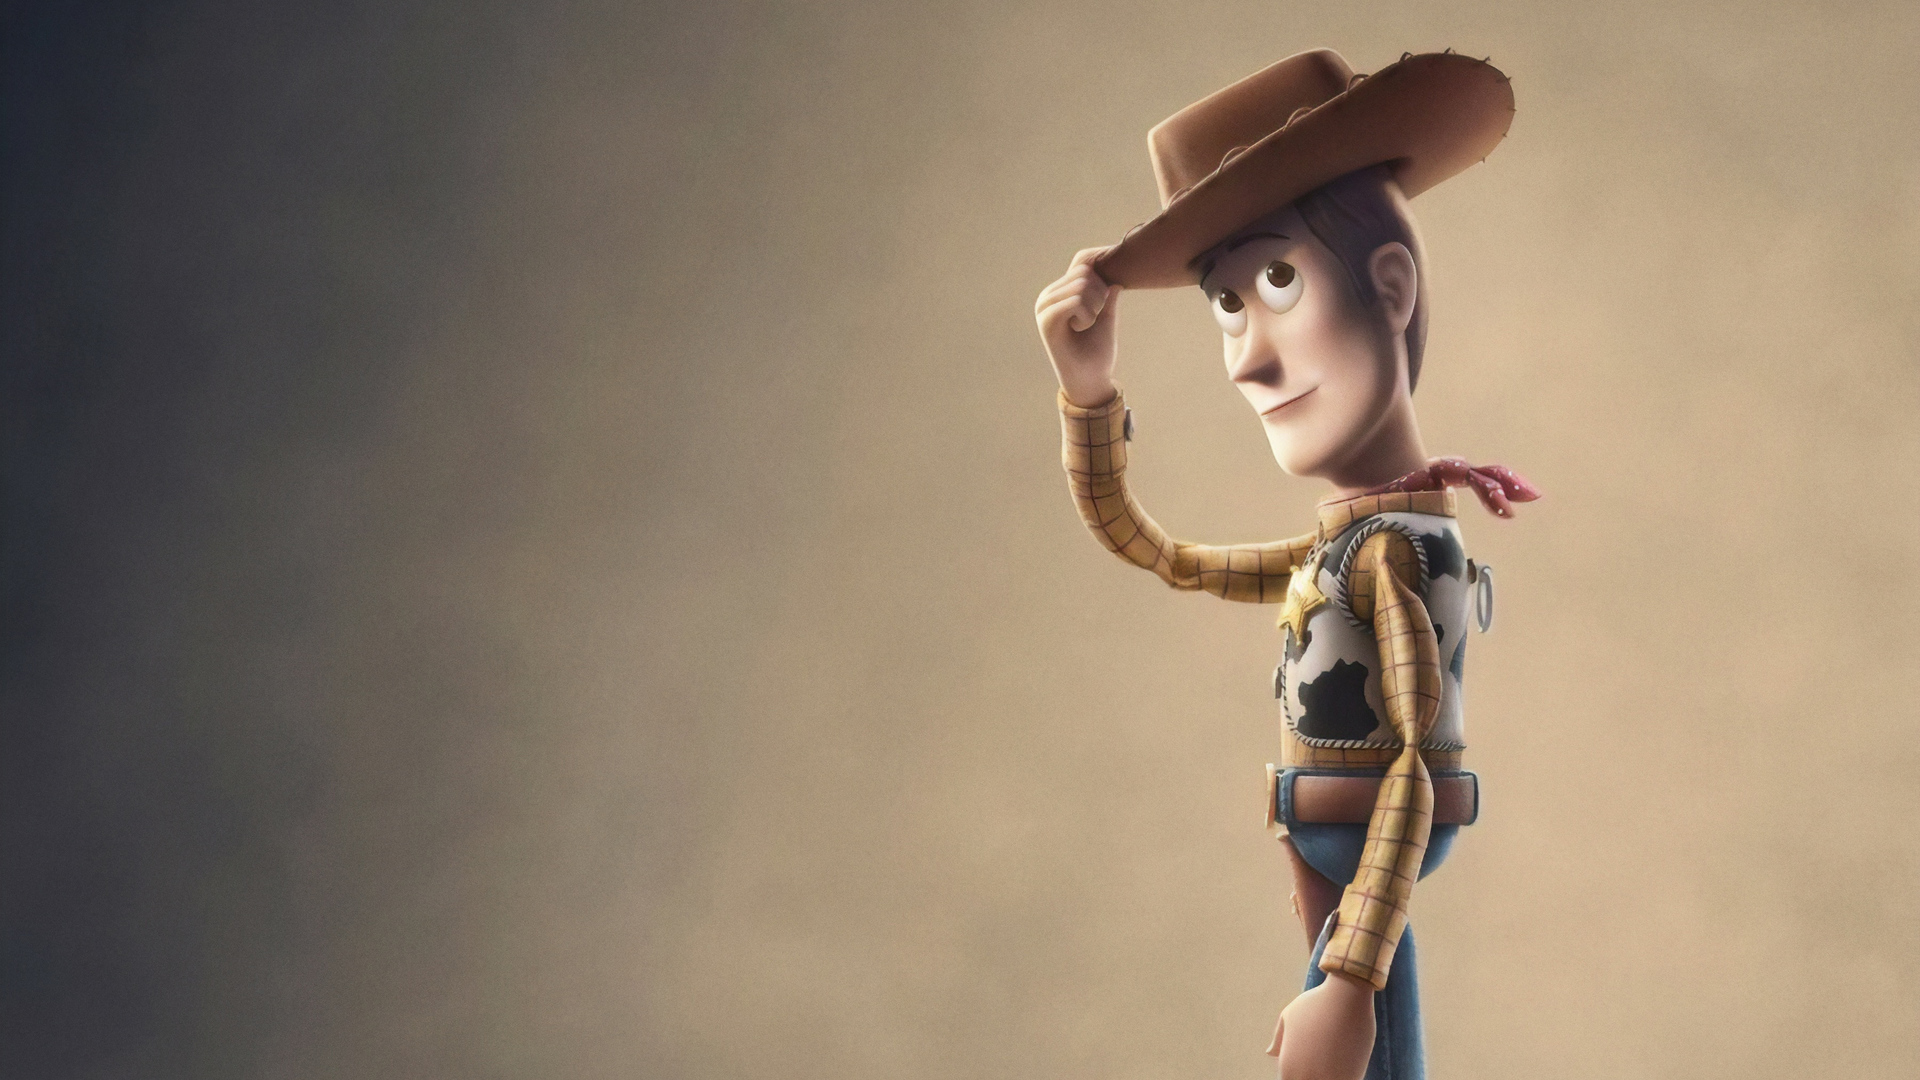 11. Toy Story 4